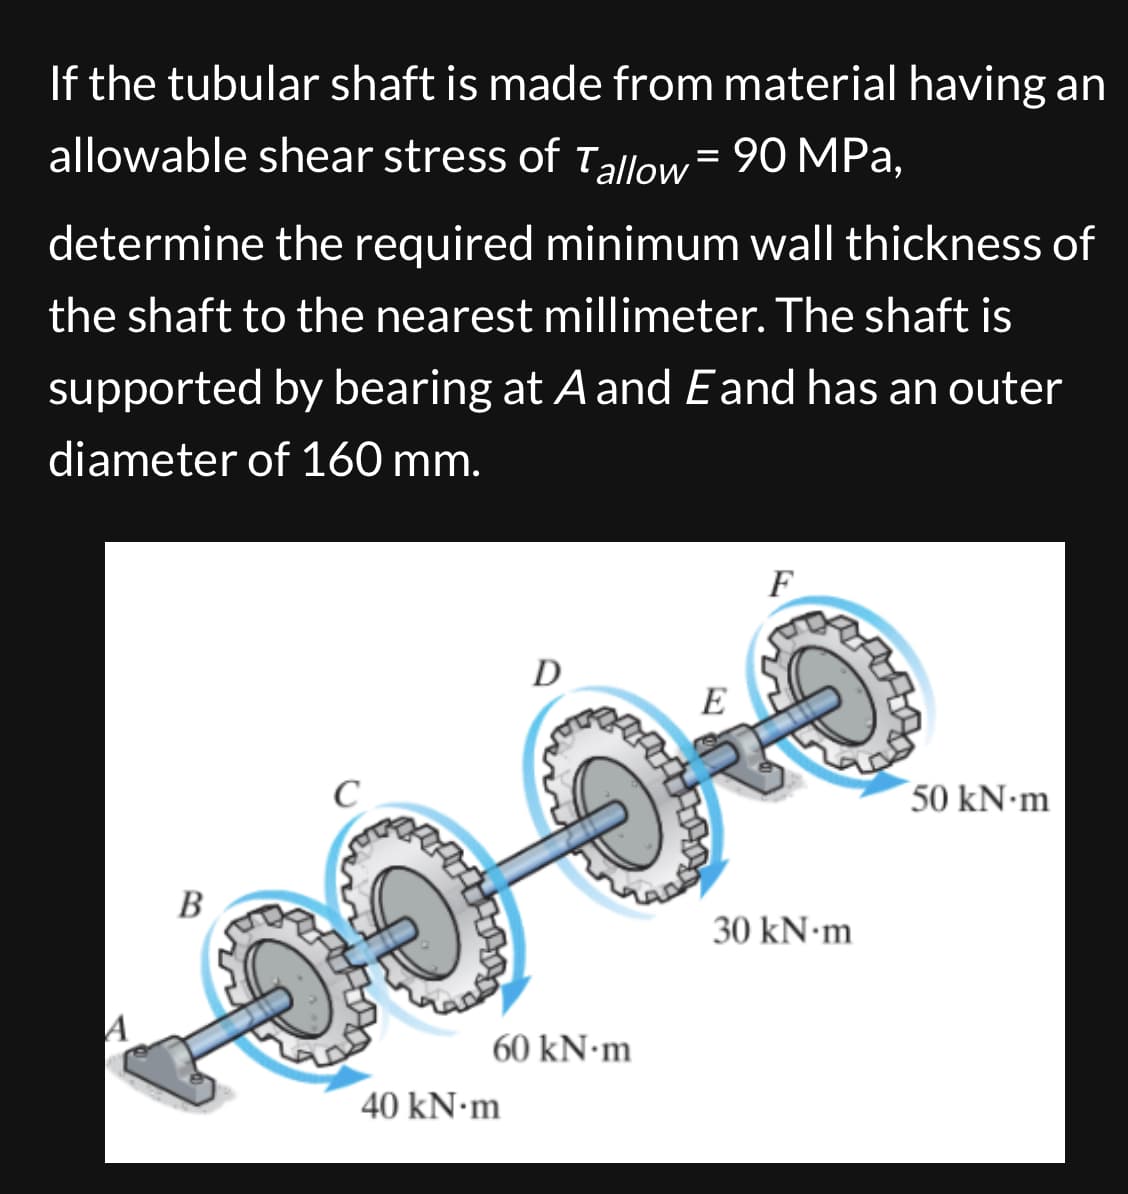 If the tubular shaft is made from material having an
allowable shear stress of Tallow = 90 MPa,
determine the required minimum wall thickness of
the shaft to the nearest millimeter. The shaft is
supported by bearing at A and E and has an outer
diameter of 160 mm.
B
D
A
40 kN·m
60 kN·m
F
E
50 kN·m
30 kN·m